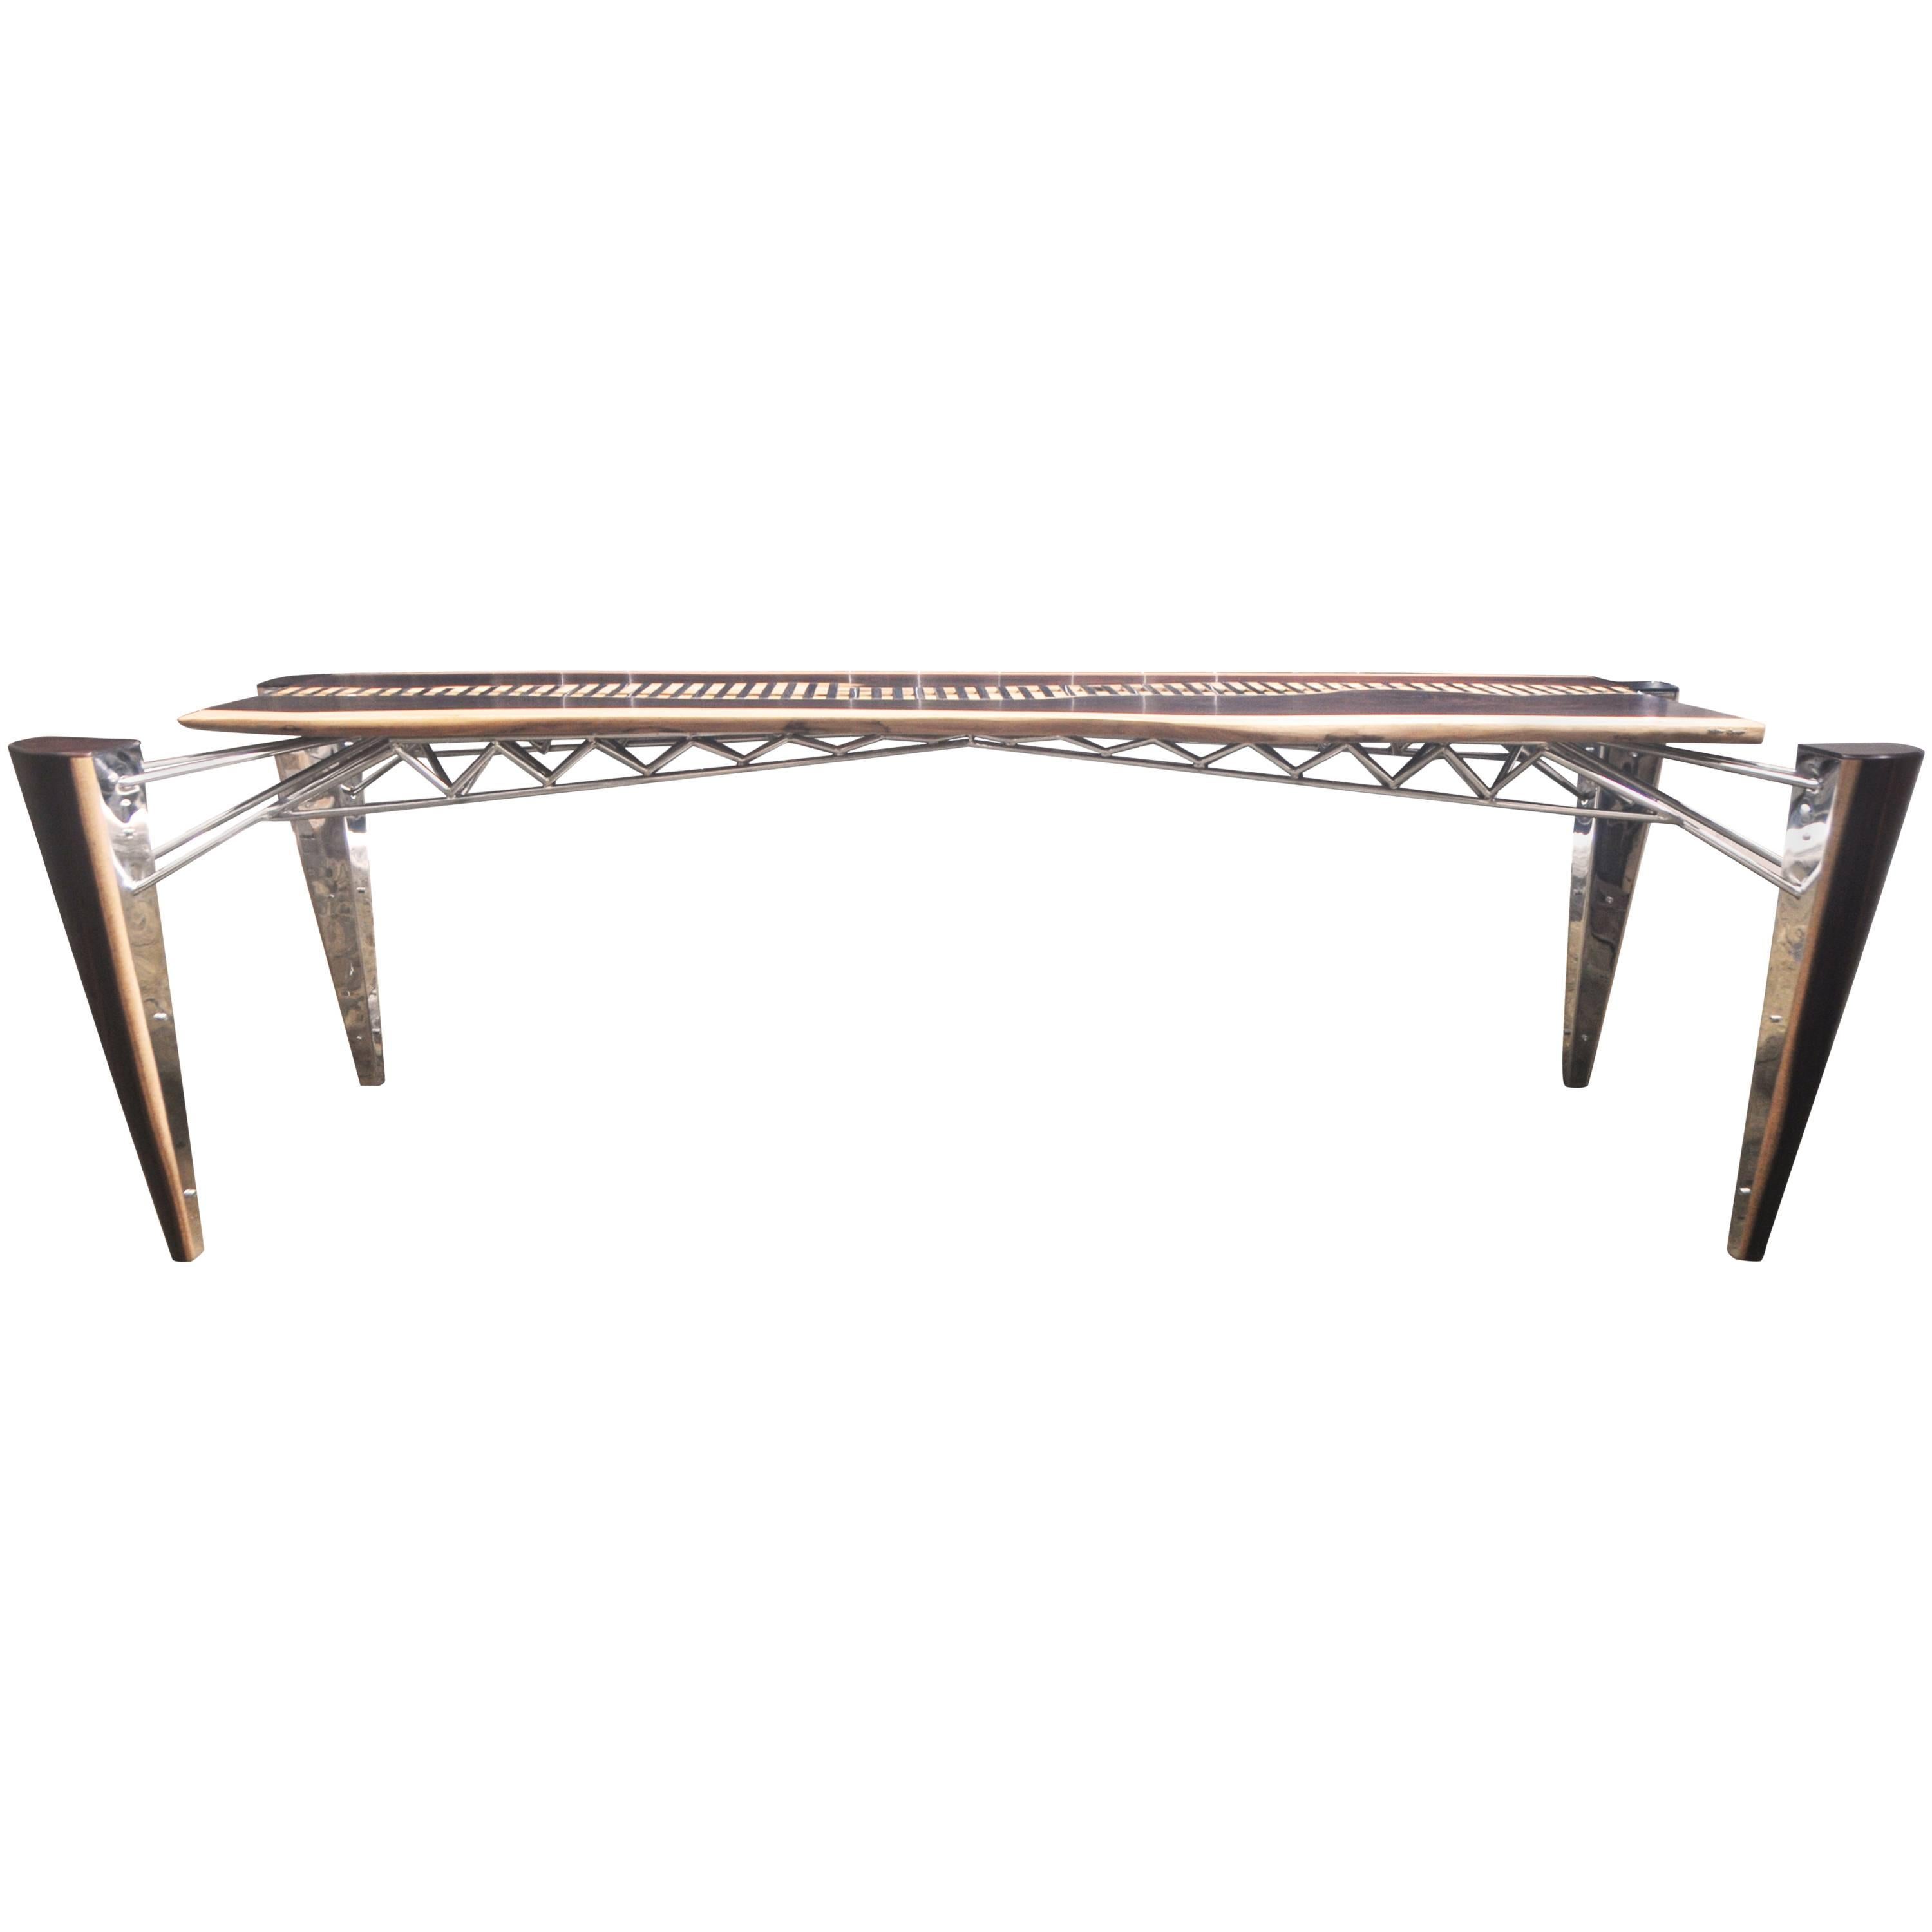 Mahakam Table One of a Kind Made of Rosewood and Mirror Polished Stainless Steel